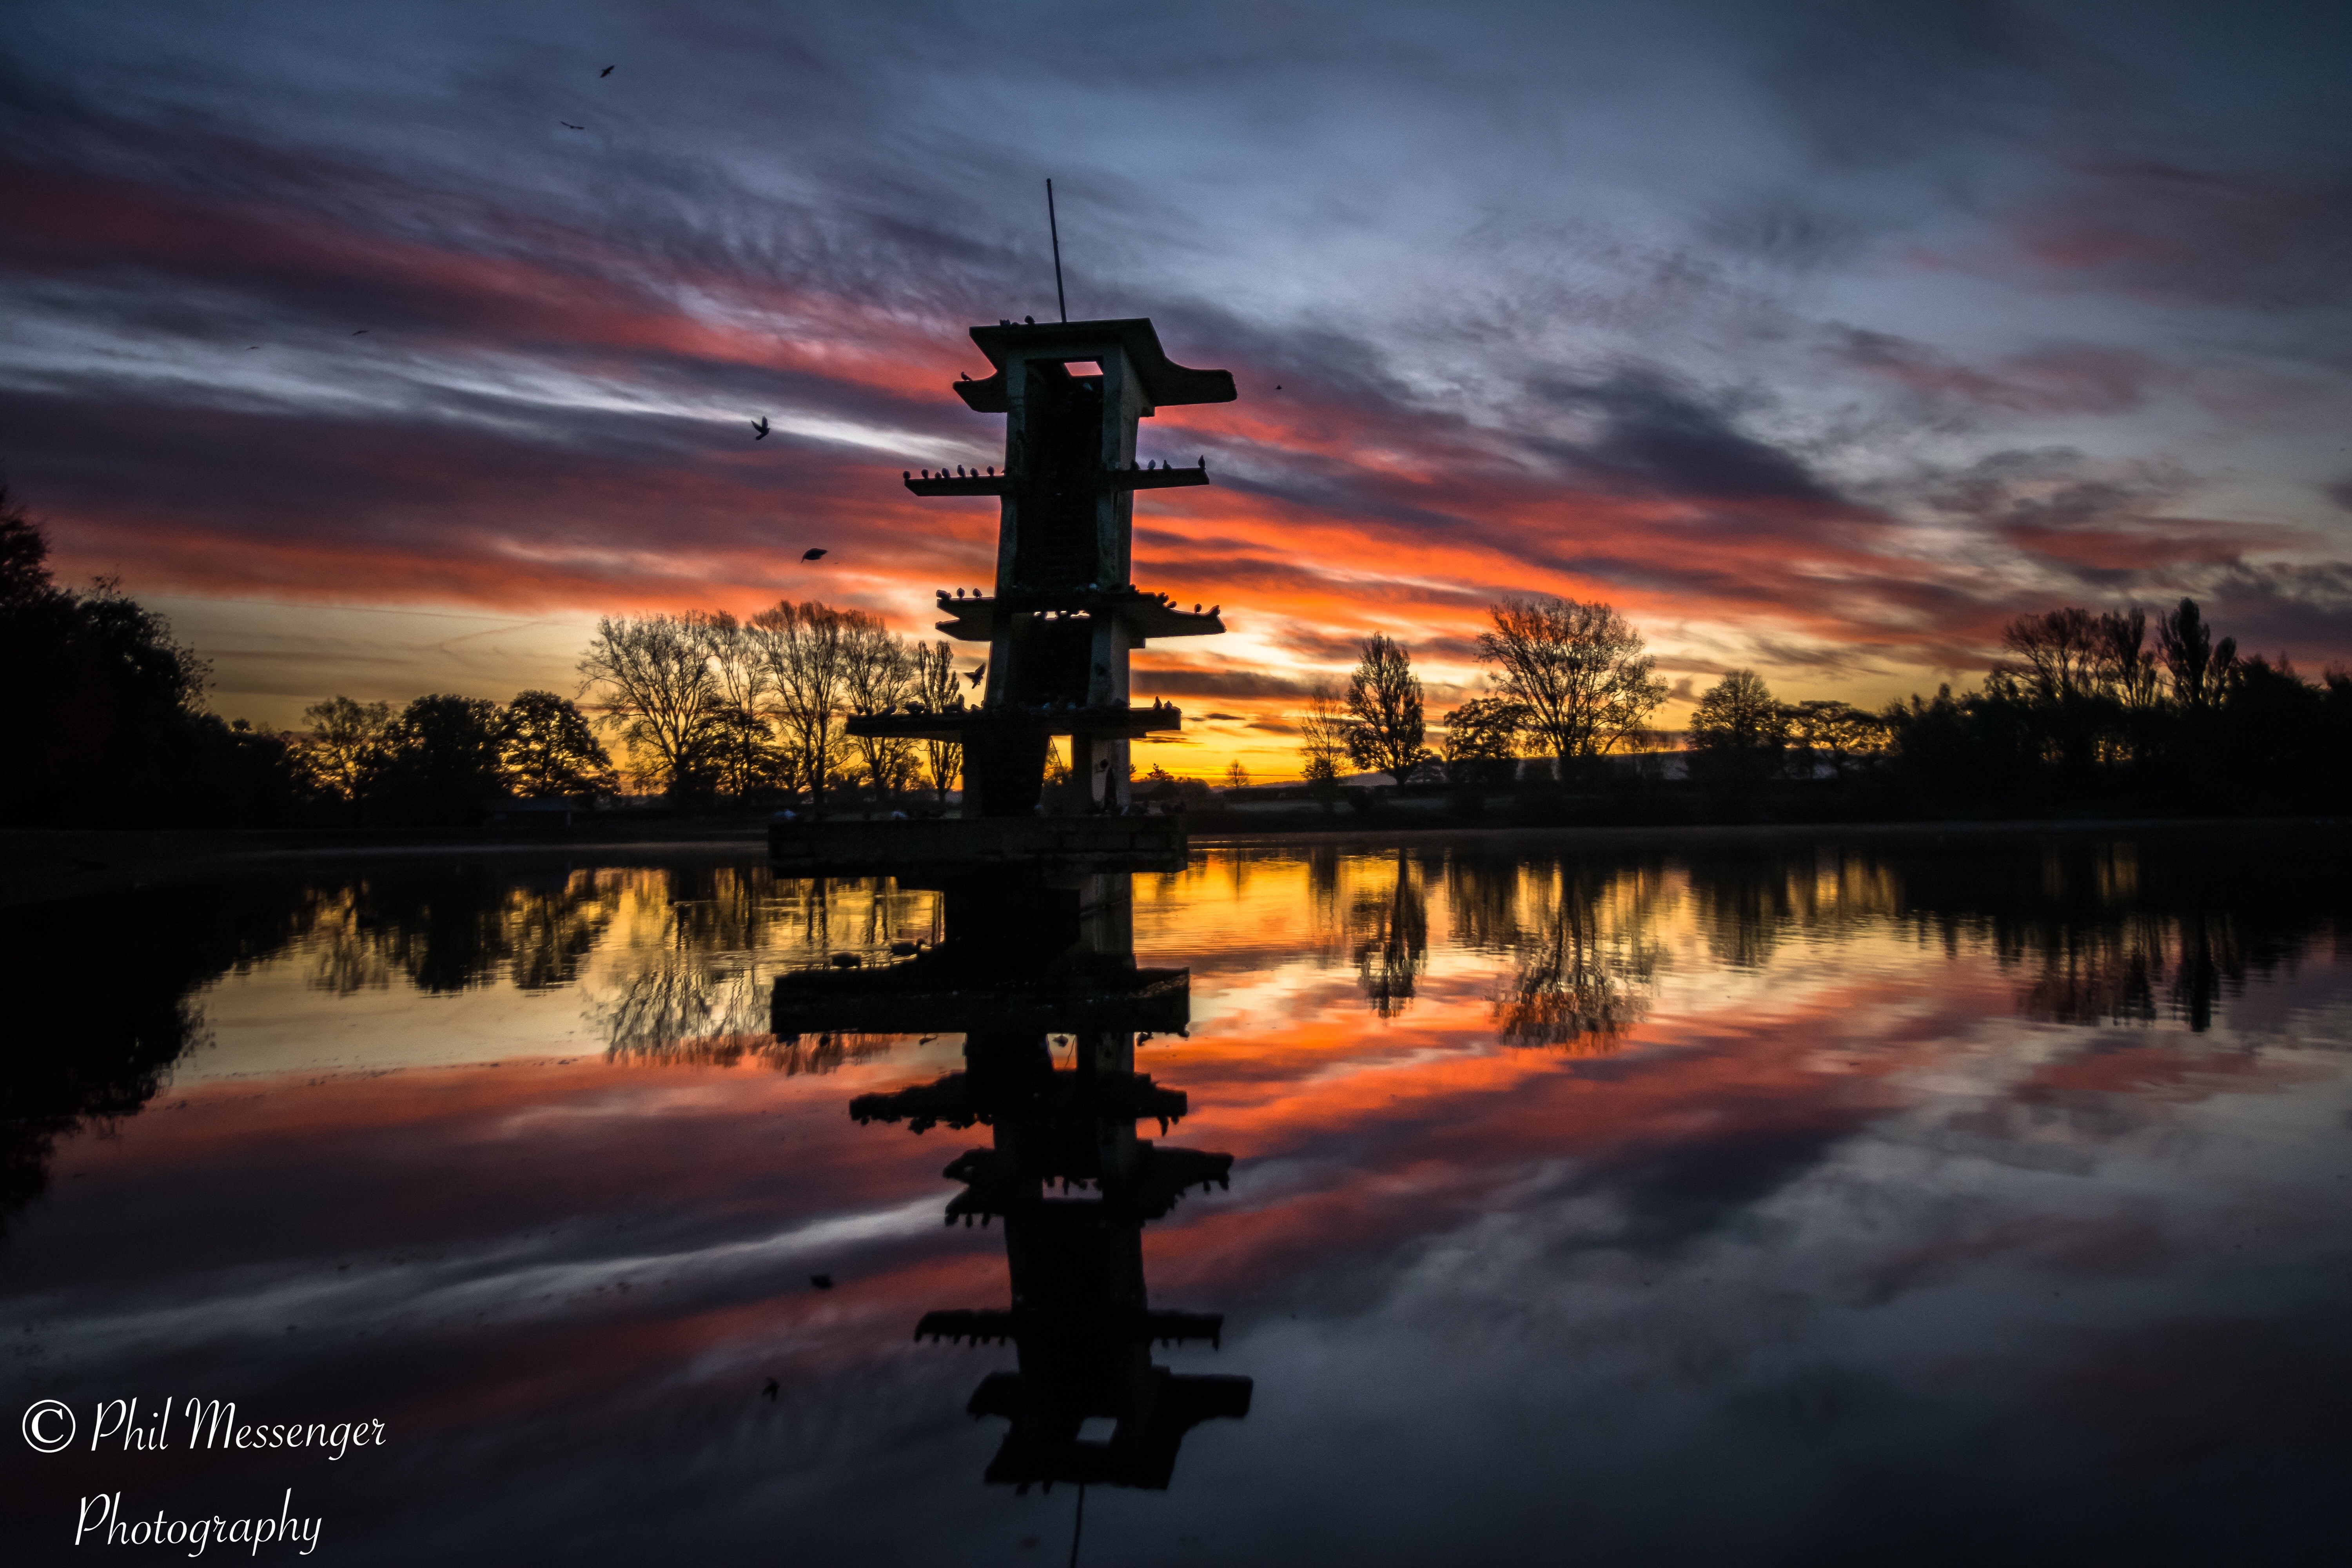 A very quick stop at Coate Water on my way to work, well worth the detour ðŸ™‚ the old diving board silhouette against a beautiful sky.